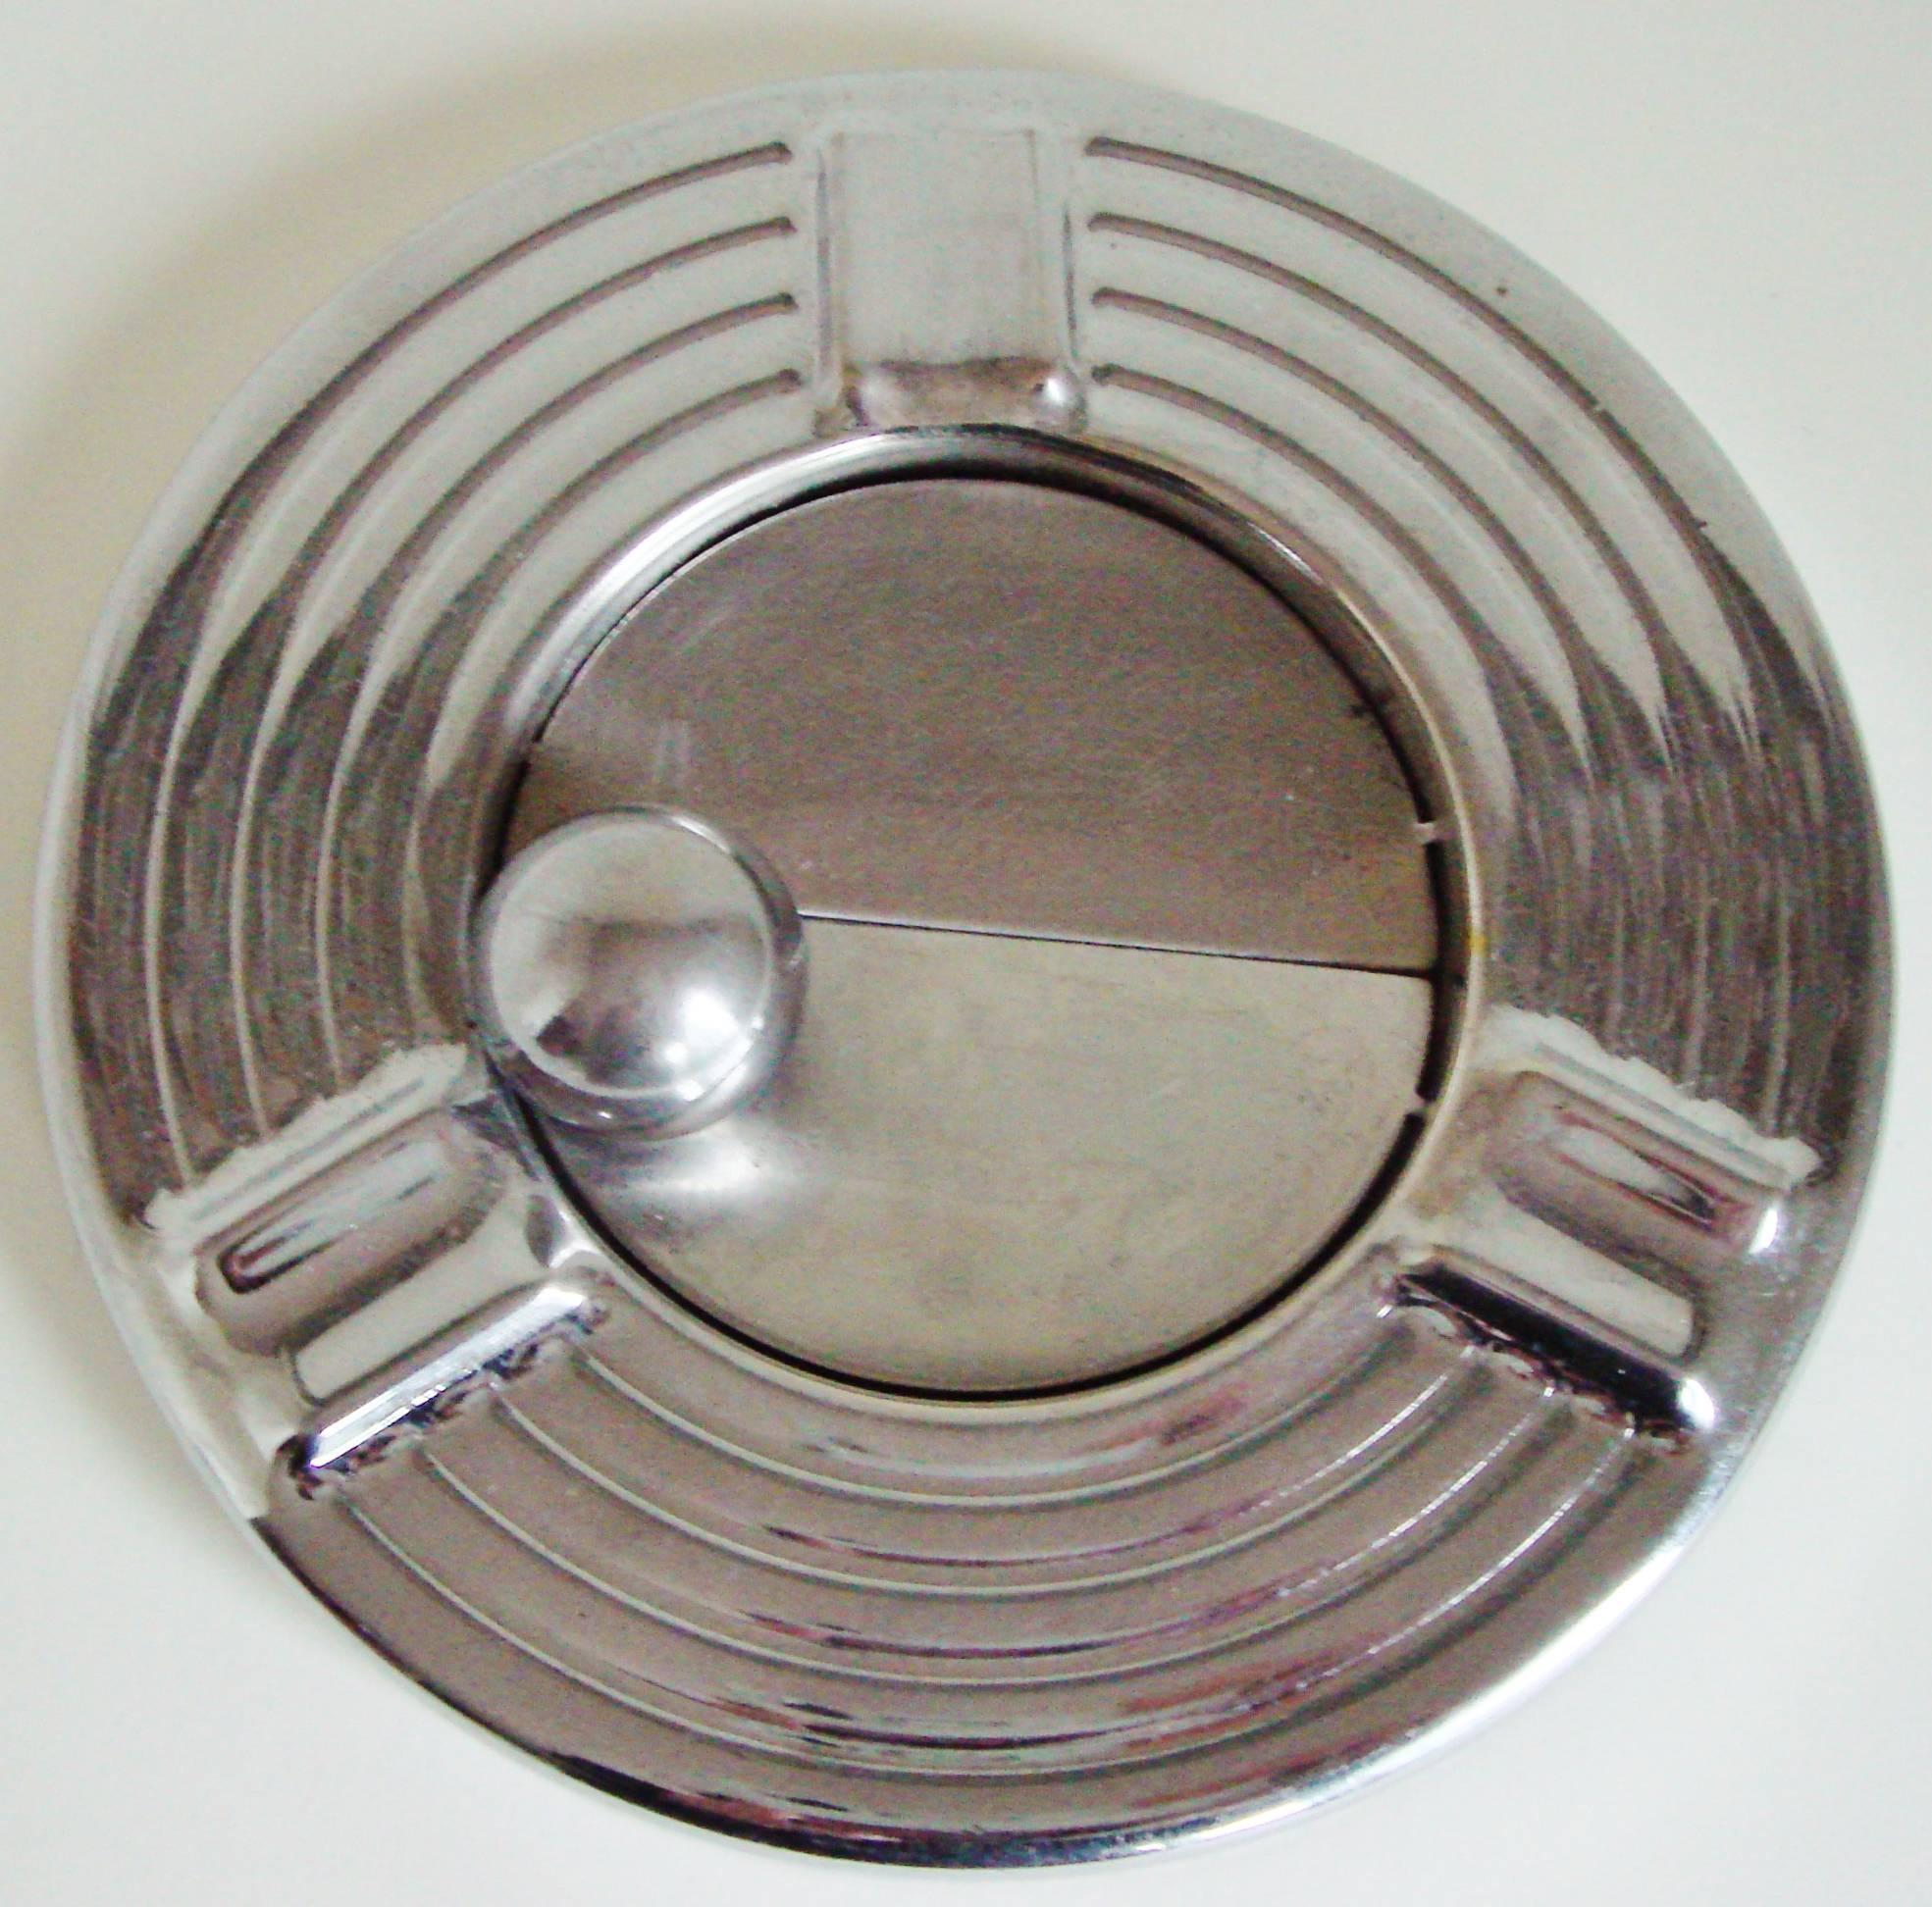 Mid-20th Century Pair of American Art Deco Chrome Theatre Lobby Standing Ashtrays by Royalchrome